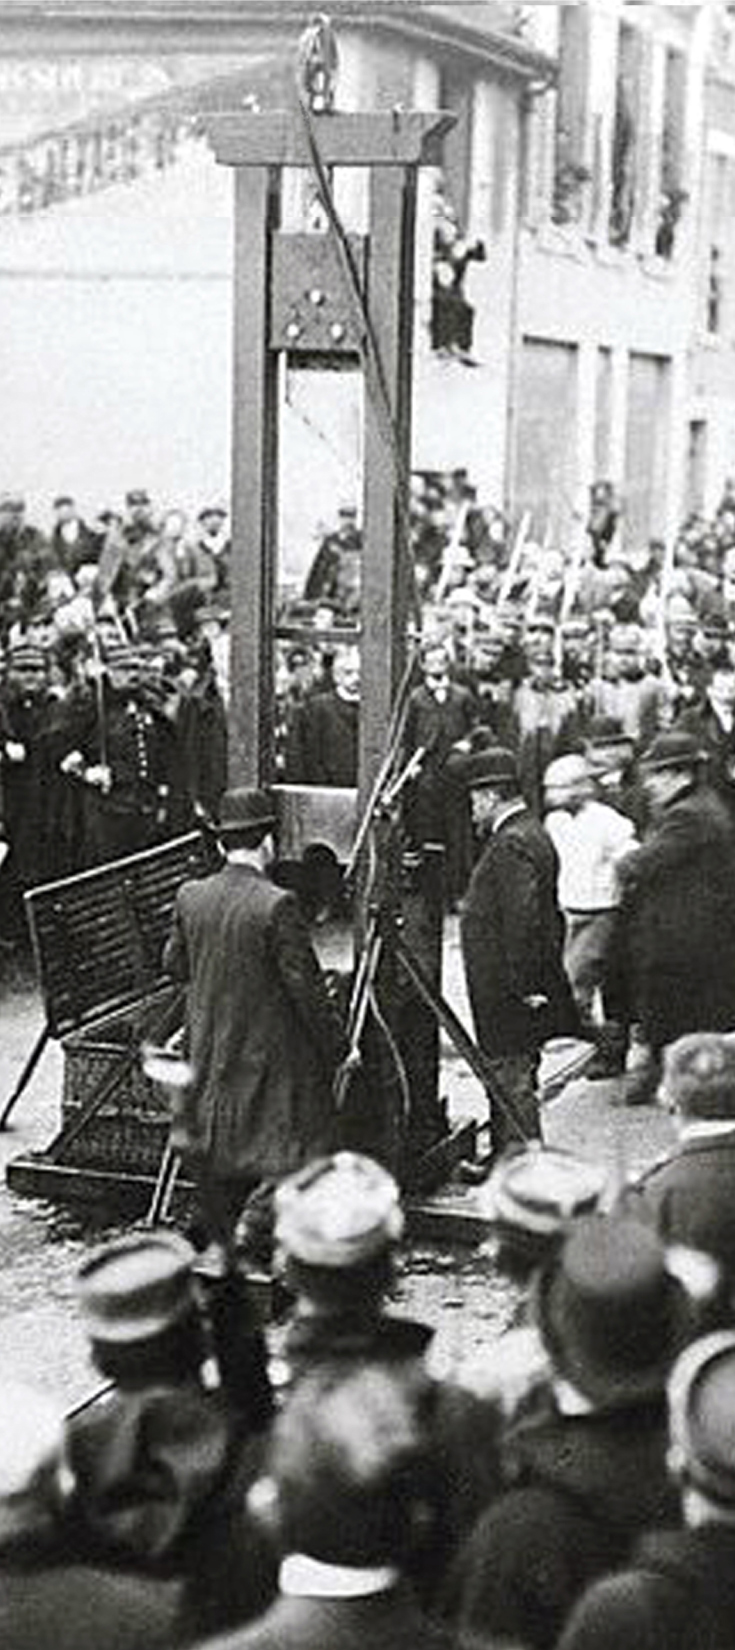 France was still executing people by guillotine when Star Wars came out